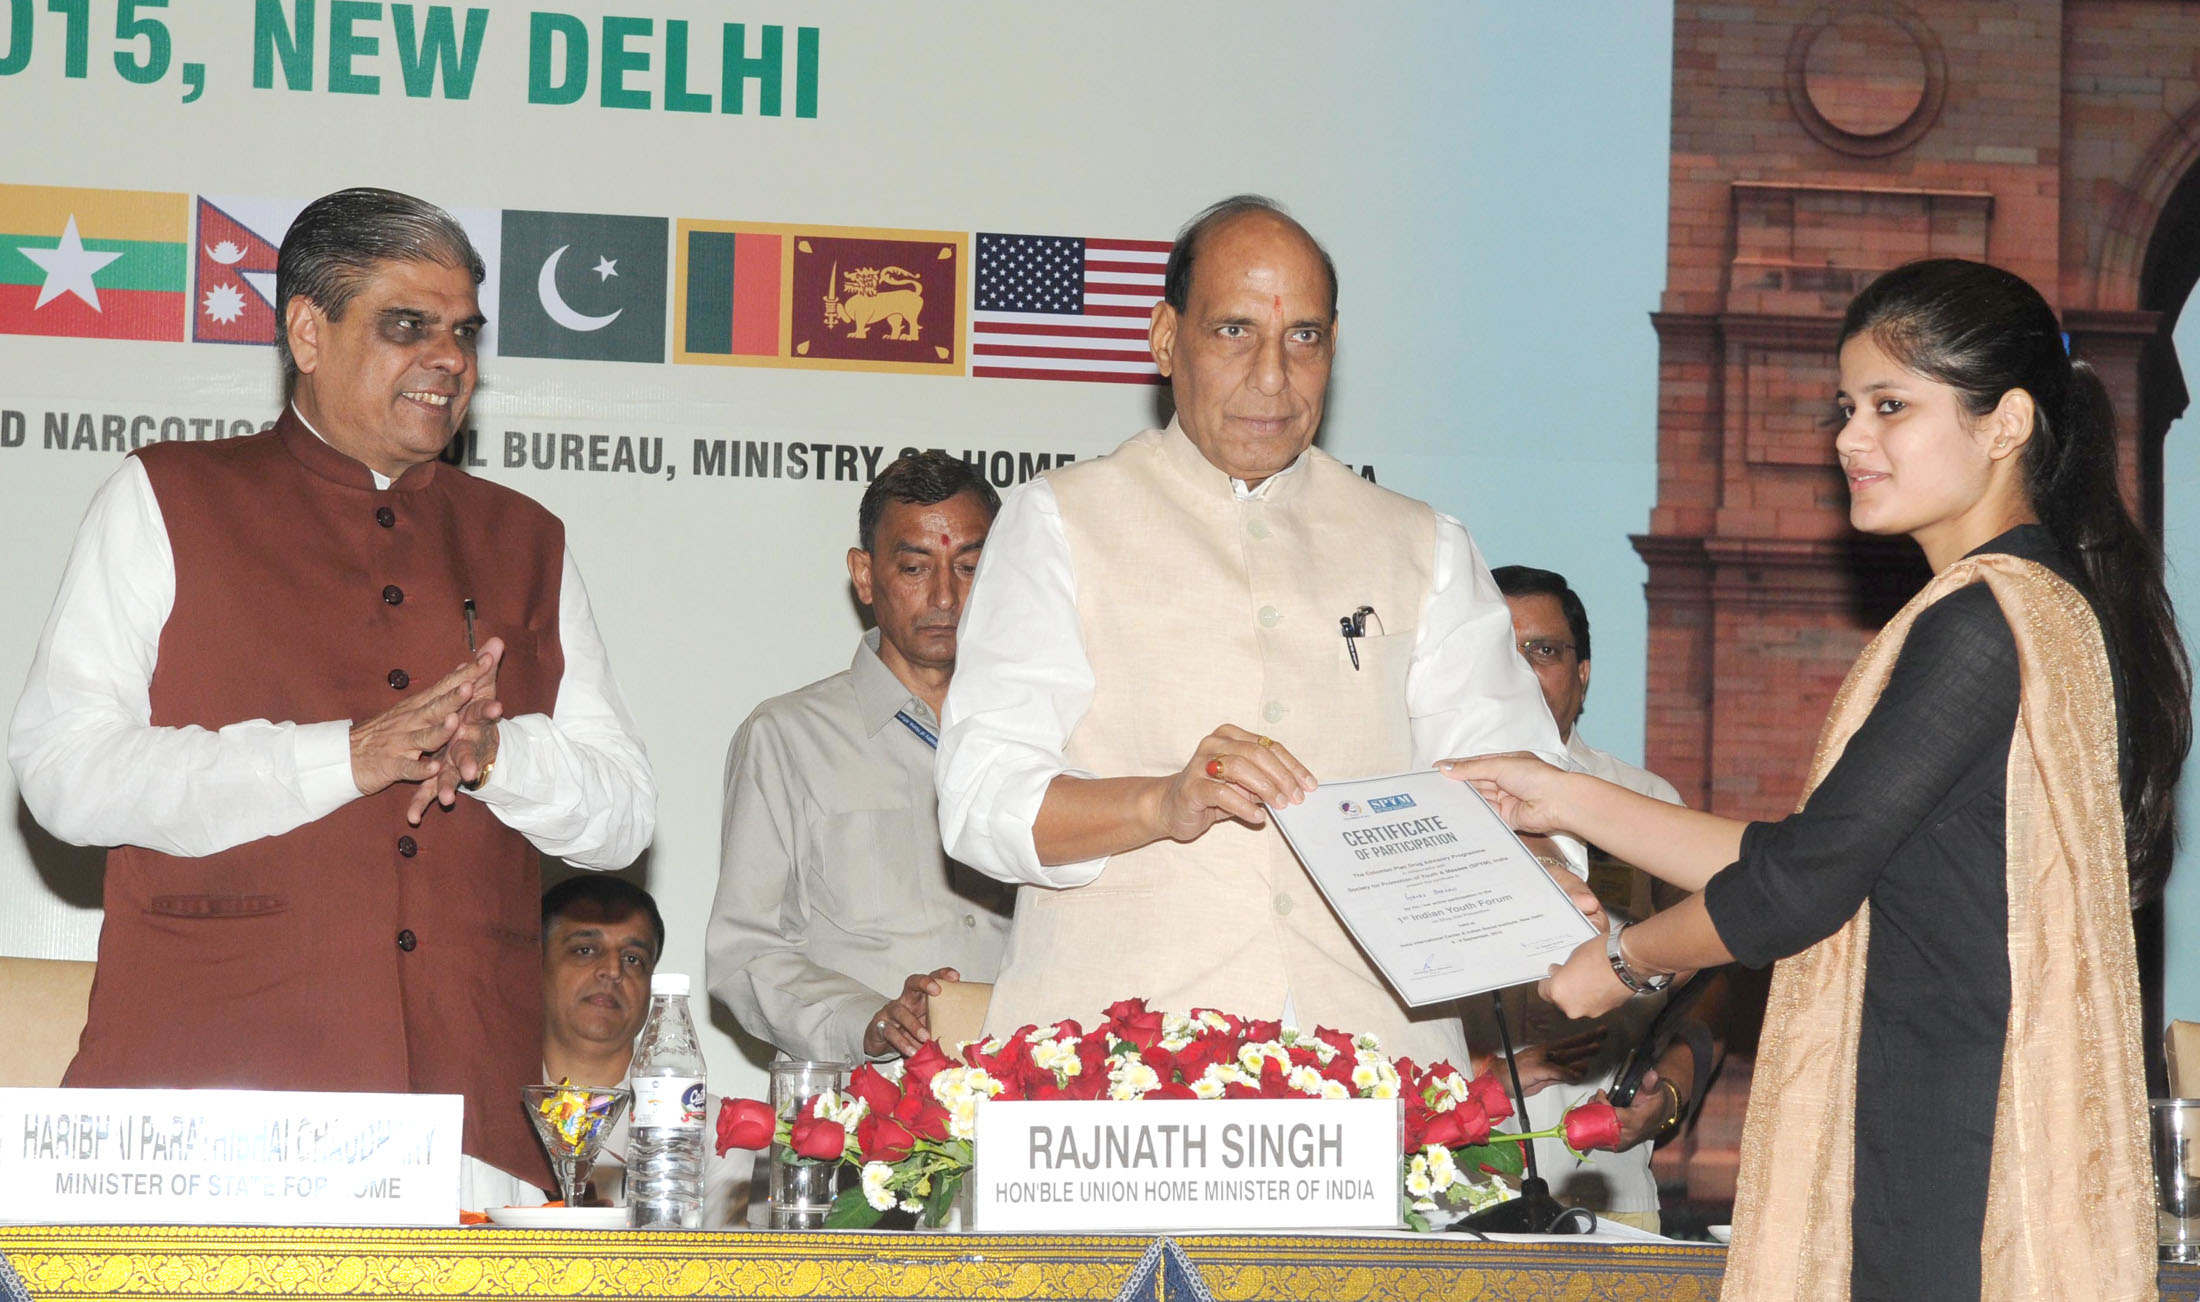 The Union Home Minister, Shri Rajnath Singh distributing the certificate to a youth representative at the inauguration of a three-day workshop on Sub-Regional Drug Focal Point Meeting and DDR Expert Group Consultation, South Asia under Colombo Plan Drug Advisory Programme, in New Delhi on September 09, 2015.   	The Minister of State for Home Affairs, Shri Haribhai Parthibhai Chaudhary is also seen.